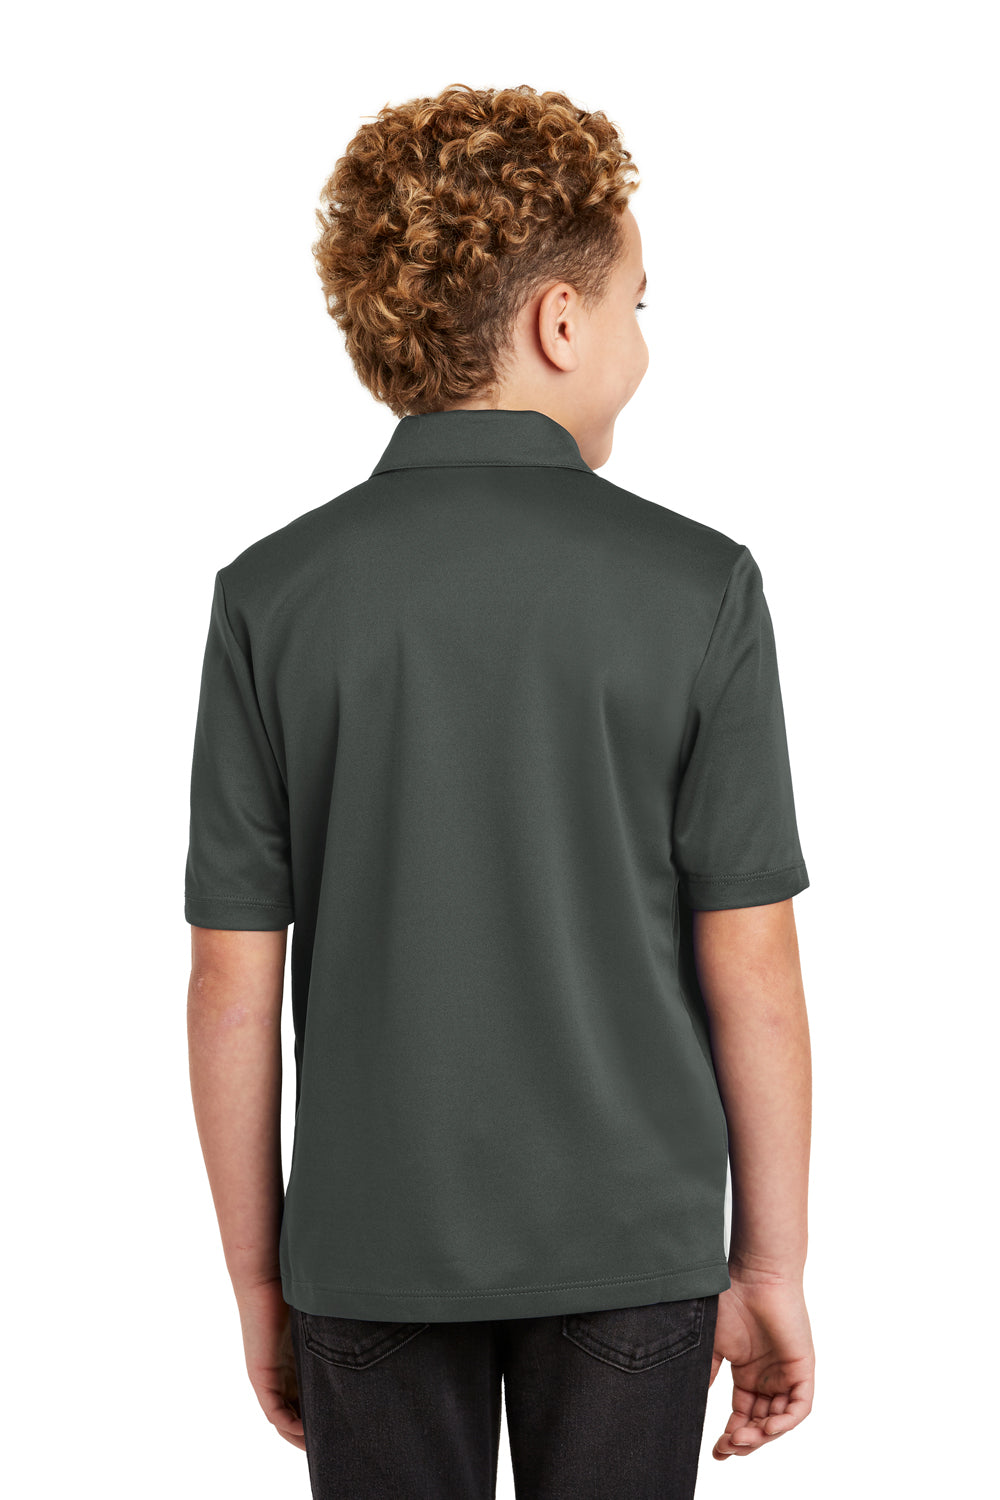 Port Authority Y540 Youth Silk Touch Performance Moisture Wicking Short Sleeve Polo Shirt Steel Grey Back